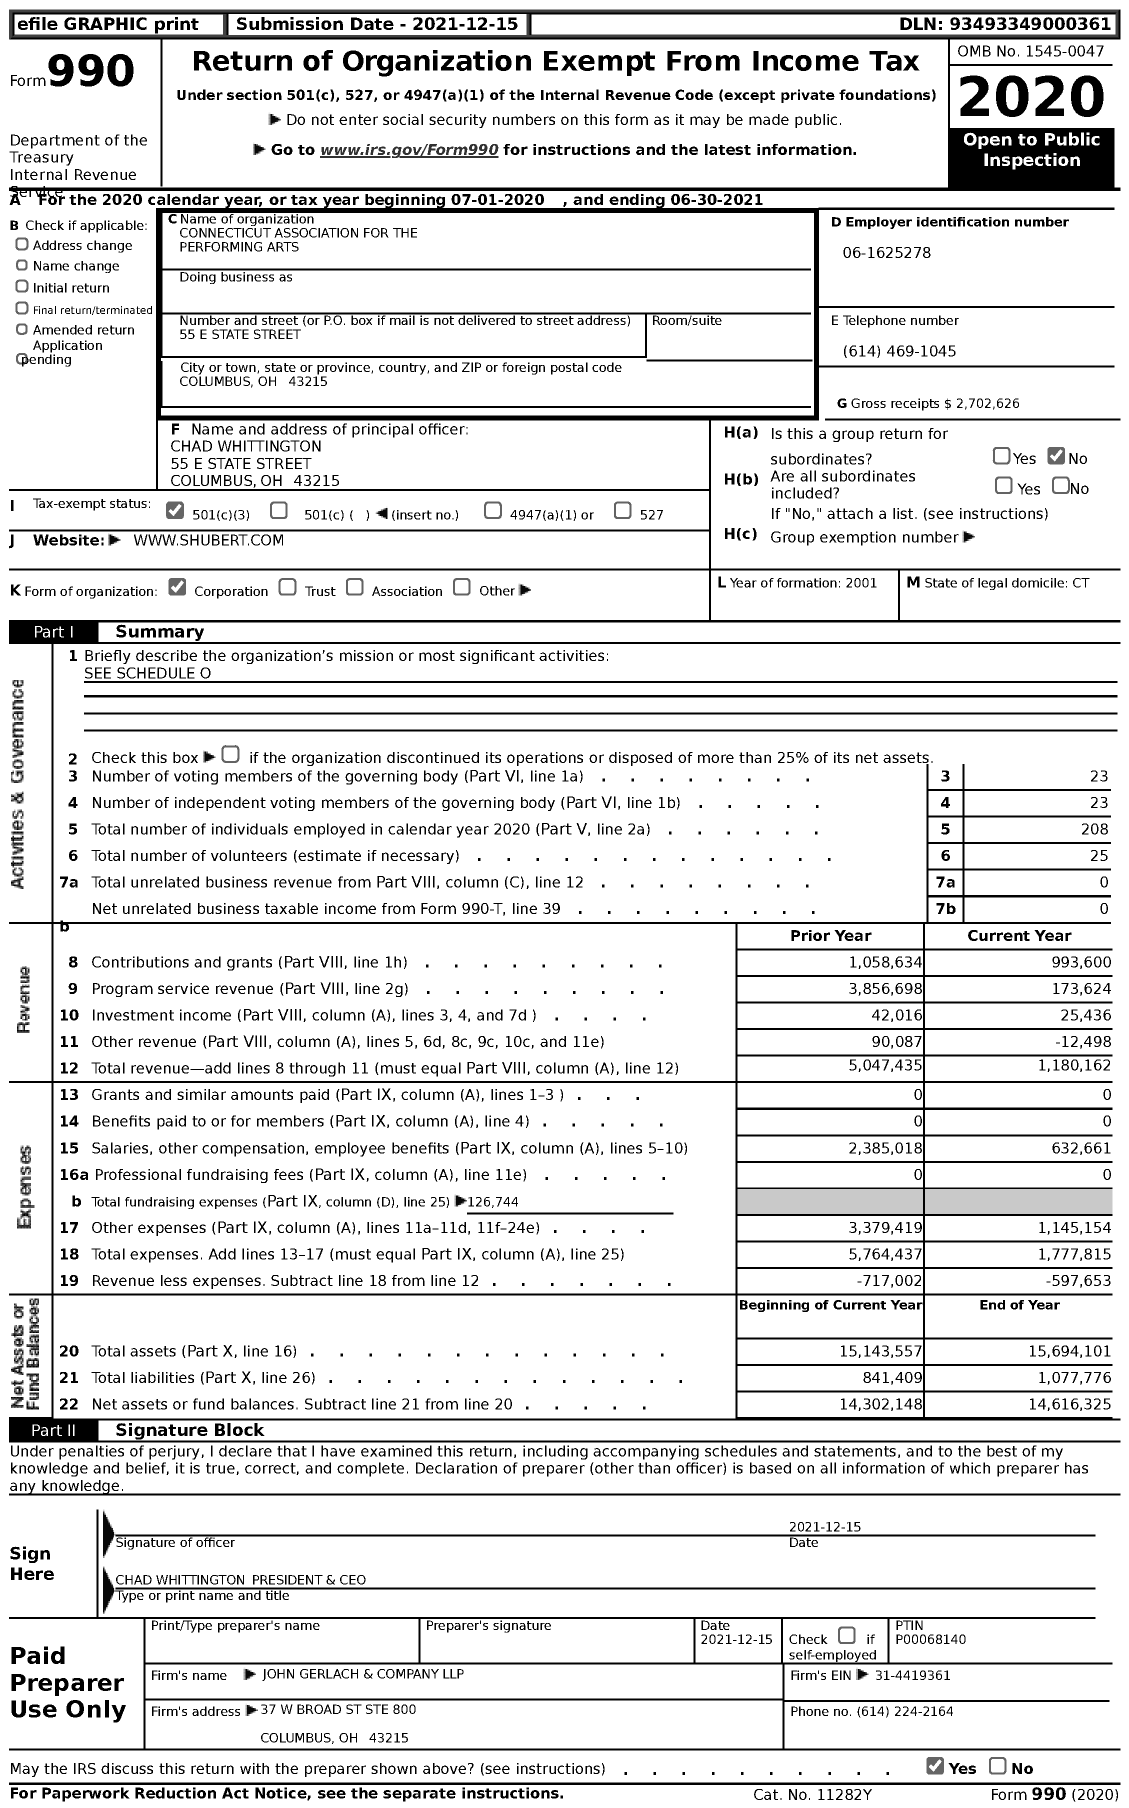 Image of first page of 2020 Form 990 for Connecticut Association for the Performing Arts